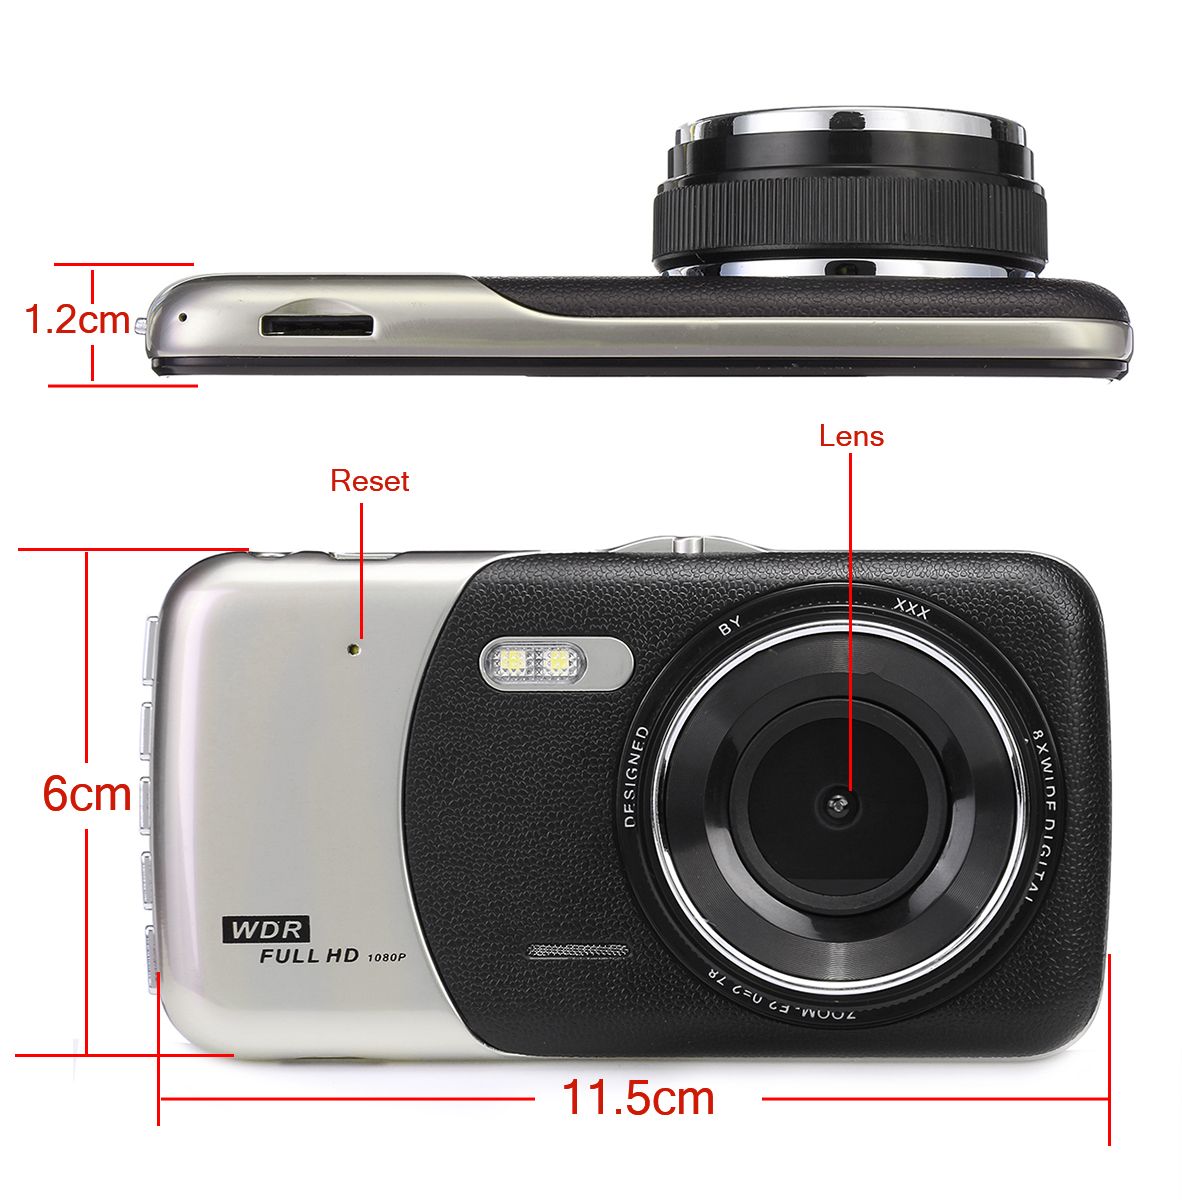 4-HD-1080P-Dual-Lens-Night-Vision-Car-DVR-Front-and-Rear-Camera-Video-Dash-Cam-Recorder-170-1609946